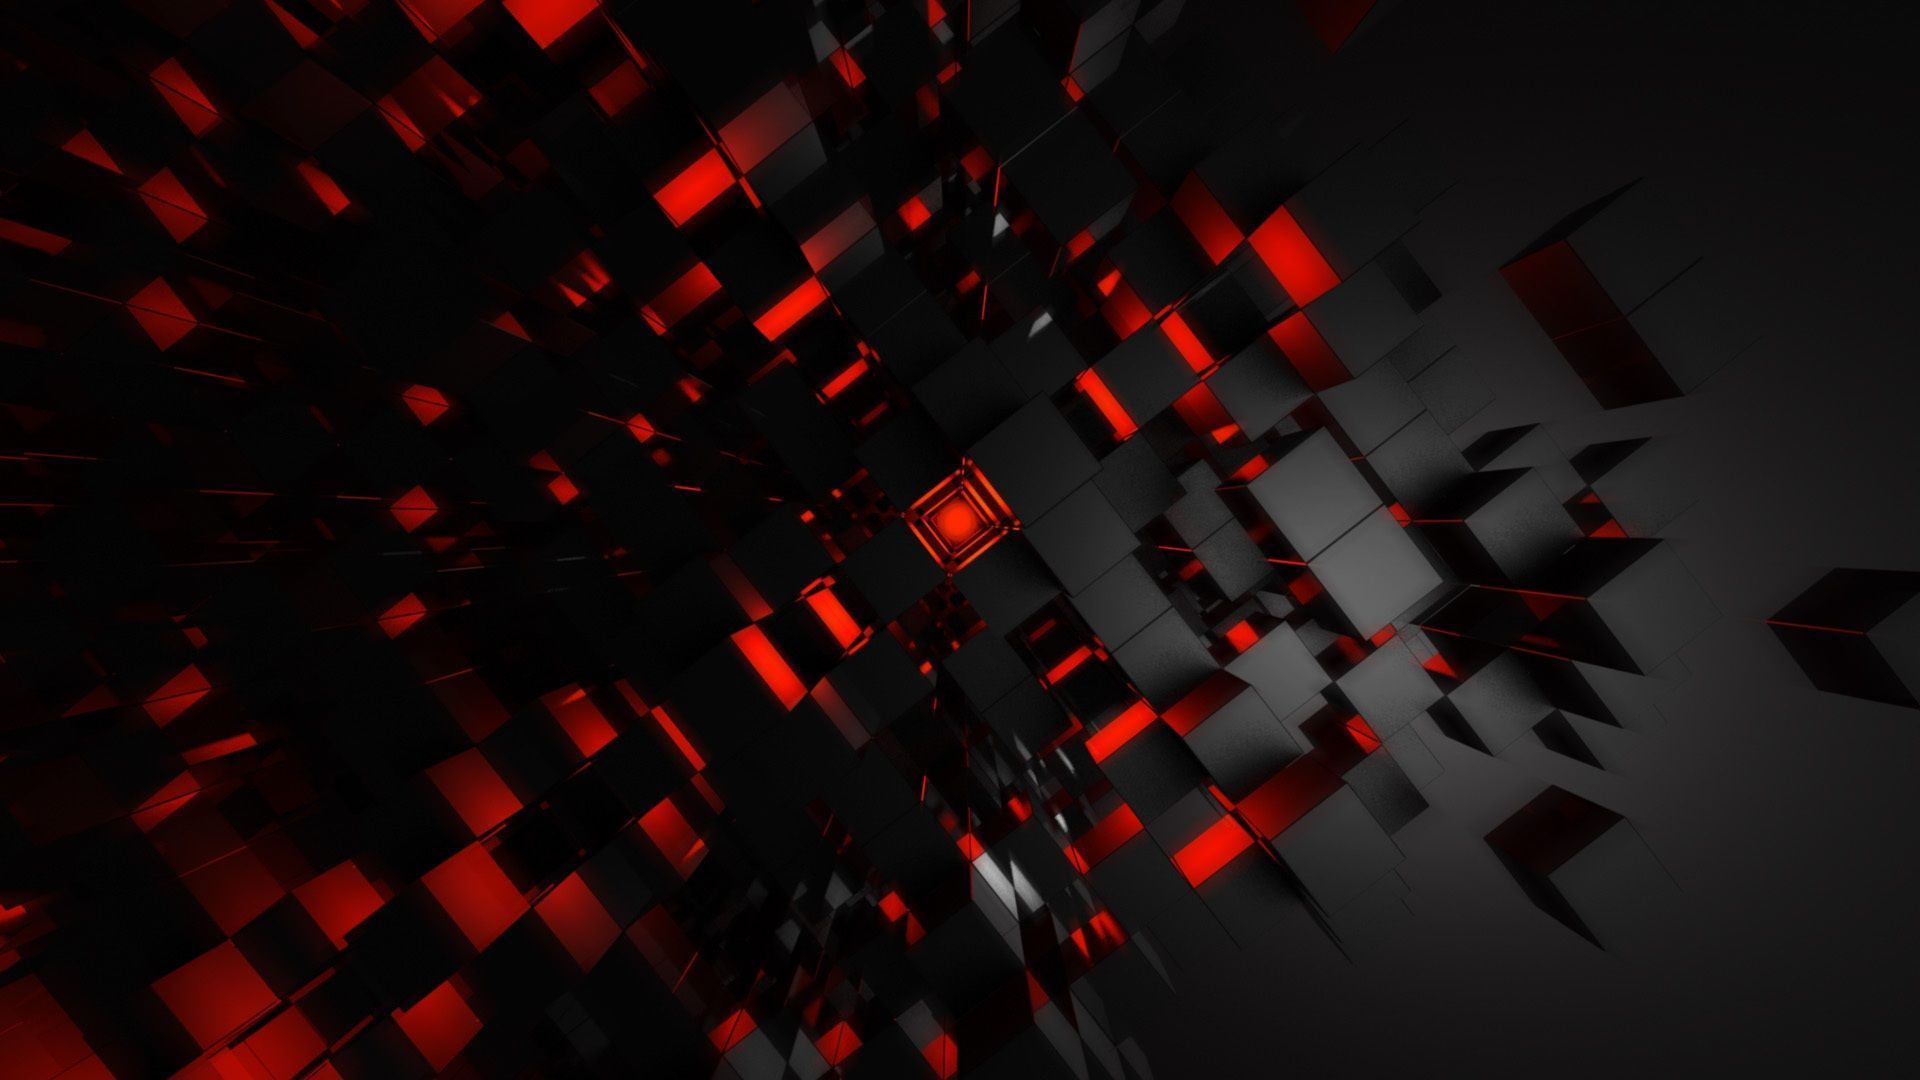 Wallpaper Red and Black Abstract Painting, Background - Download Free Image